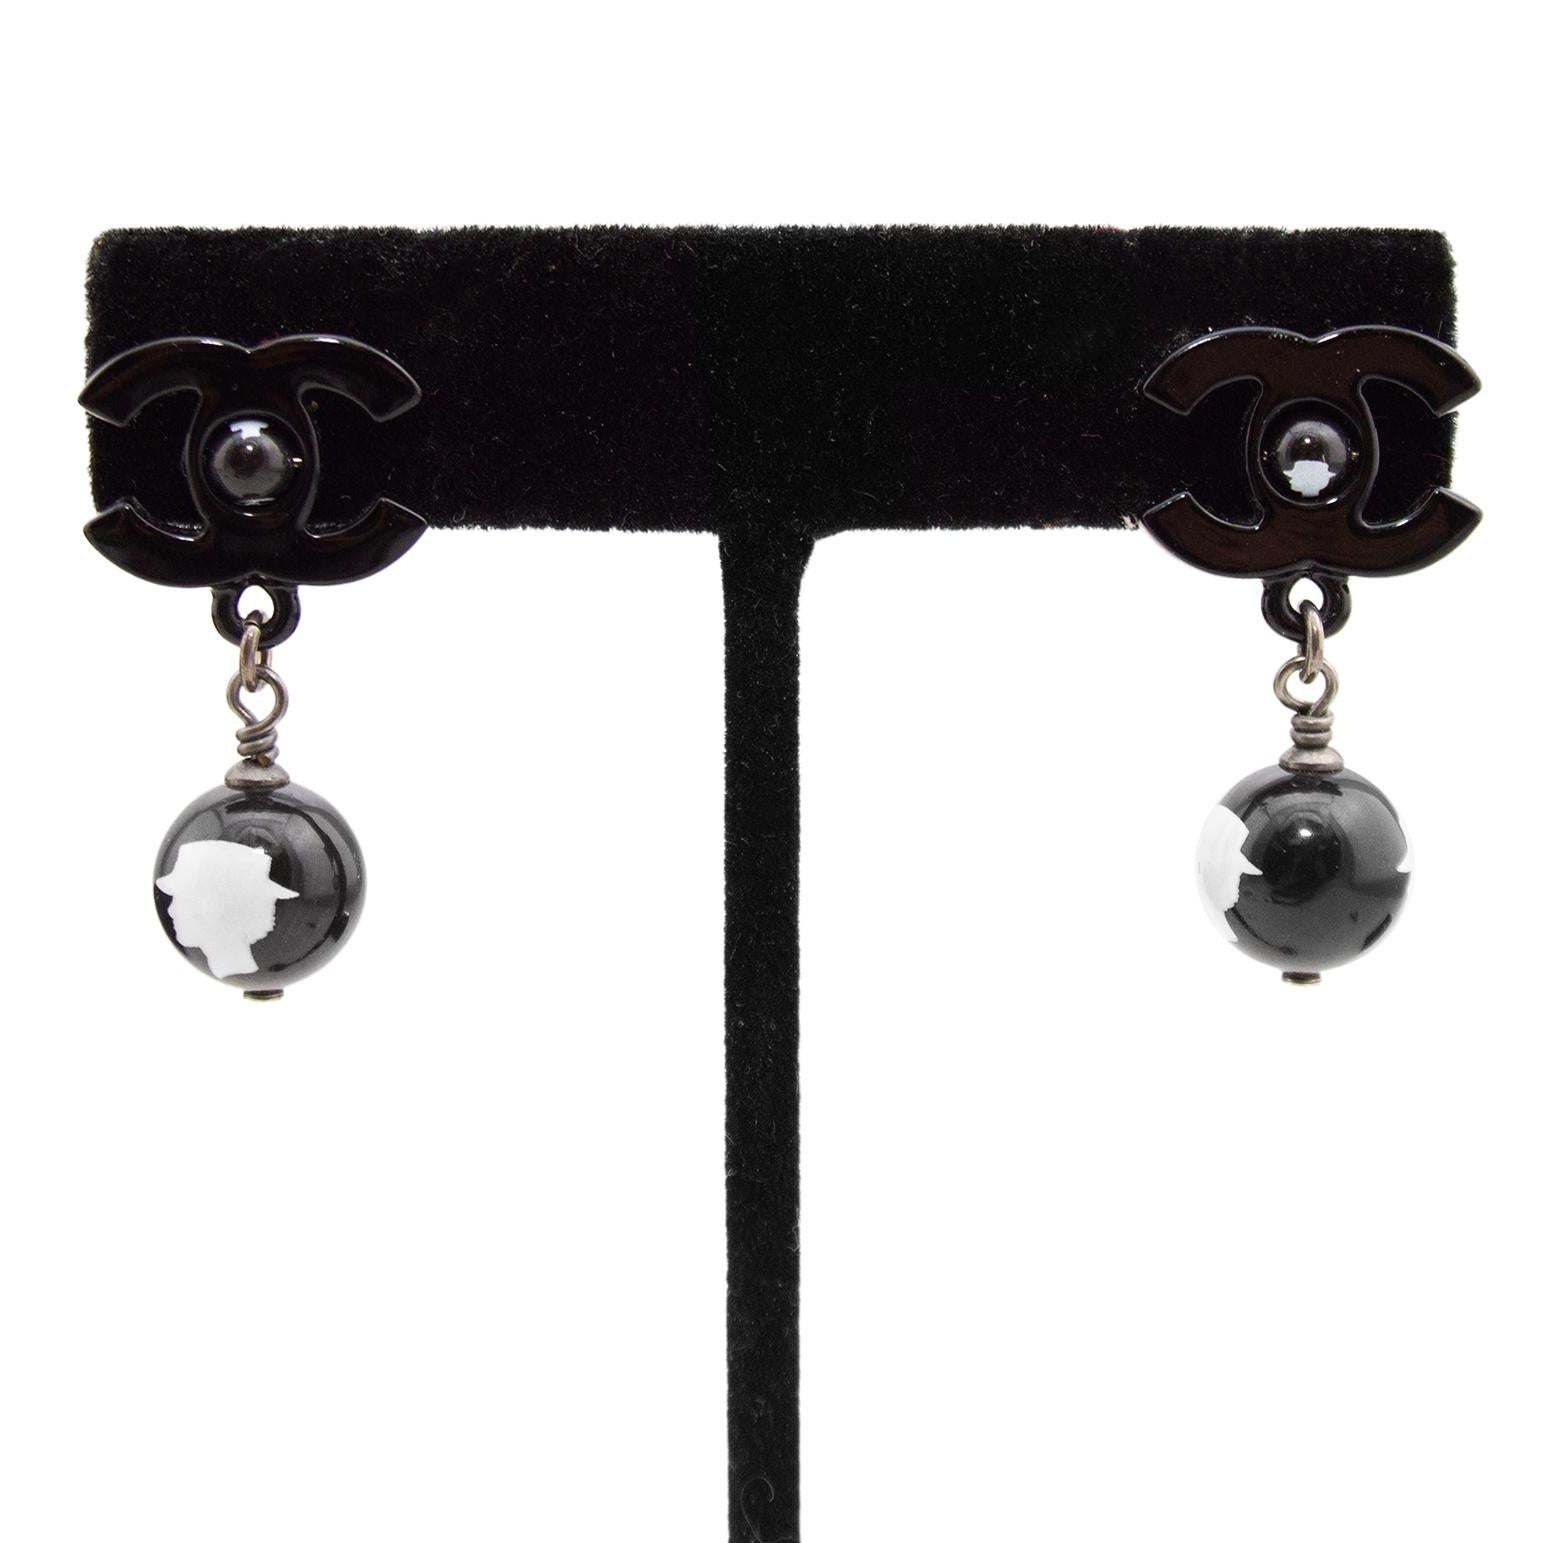 Women's Autumn 2012 Chanel Black Resin Earrings with White Cameos